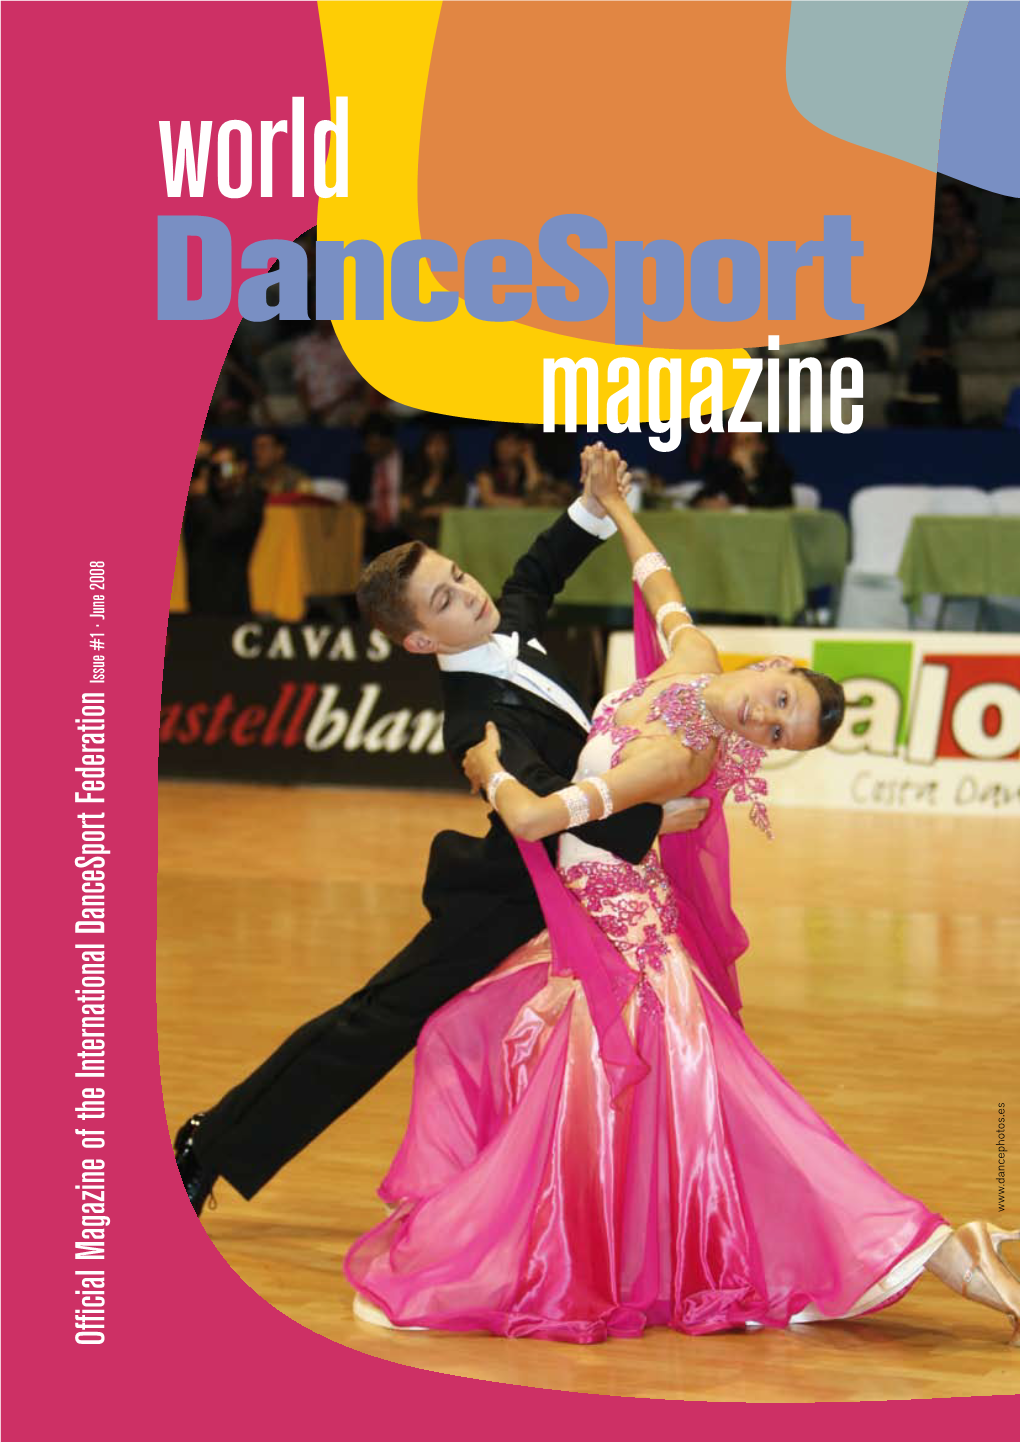 Official Magazine of the International Dancesport Federation Official Magazine of the International Dancesport Federation